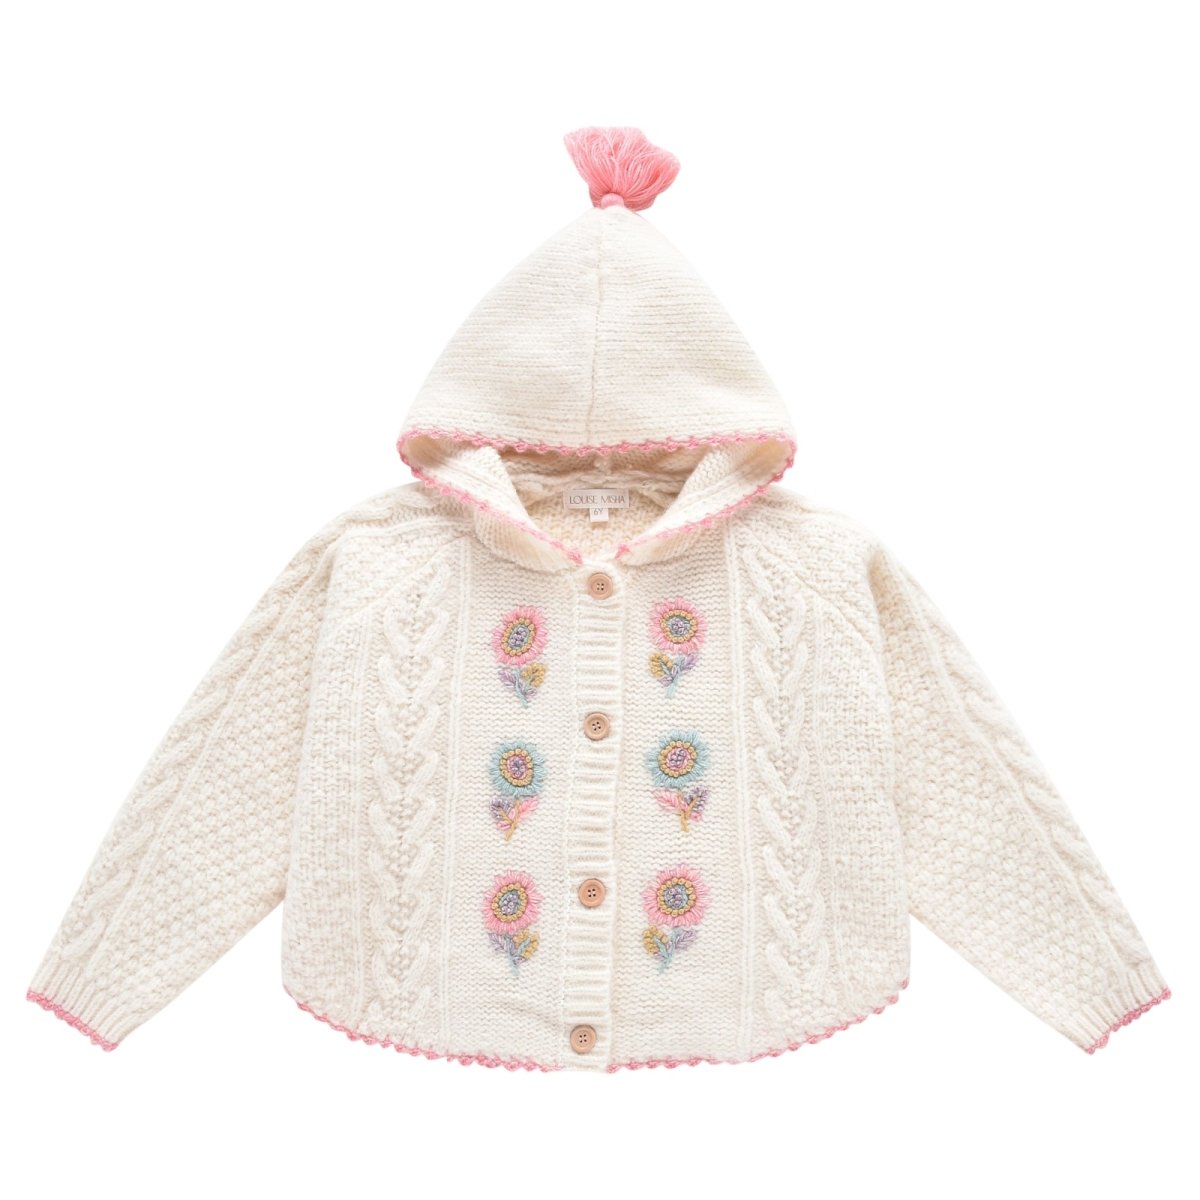 CLARA KNITTED HOODED JACKET (PREORDER) - LOUISE MISHA KIDS